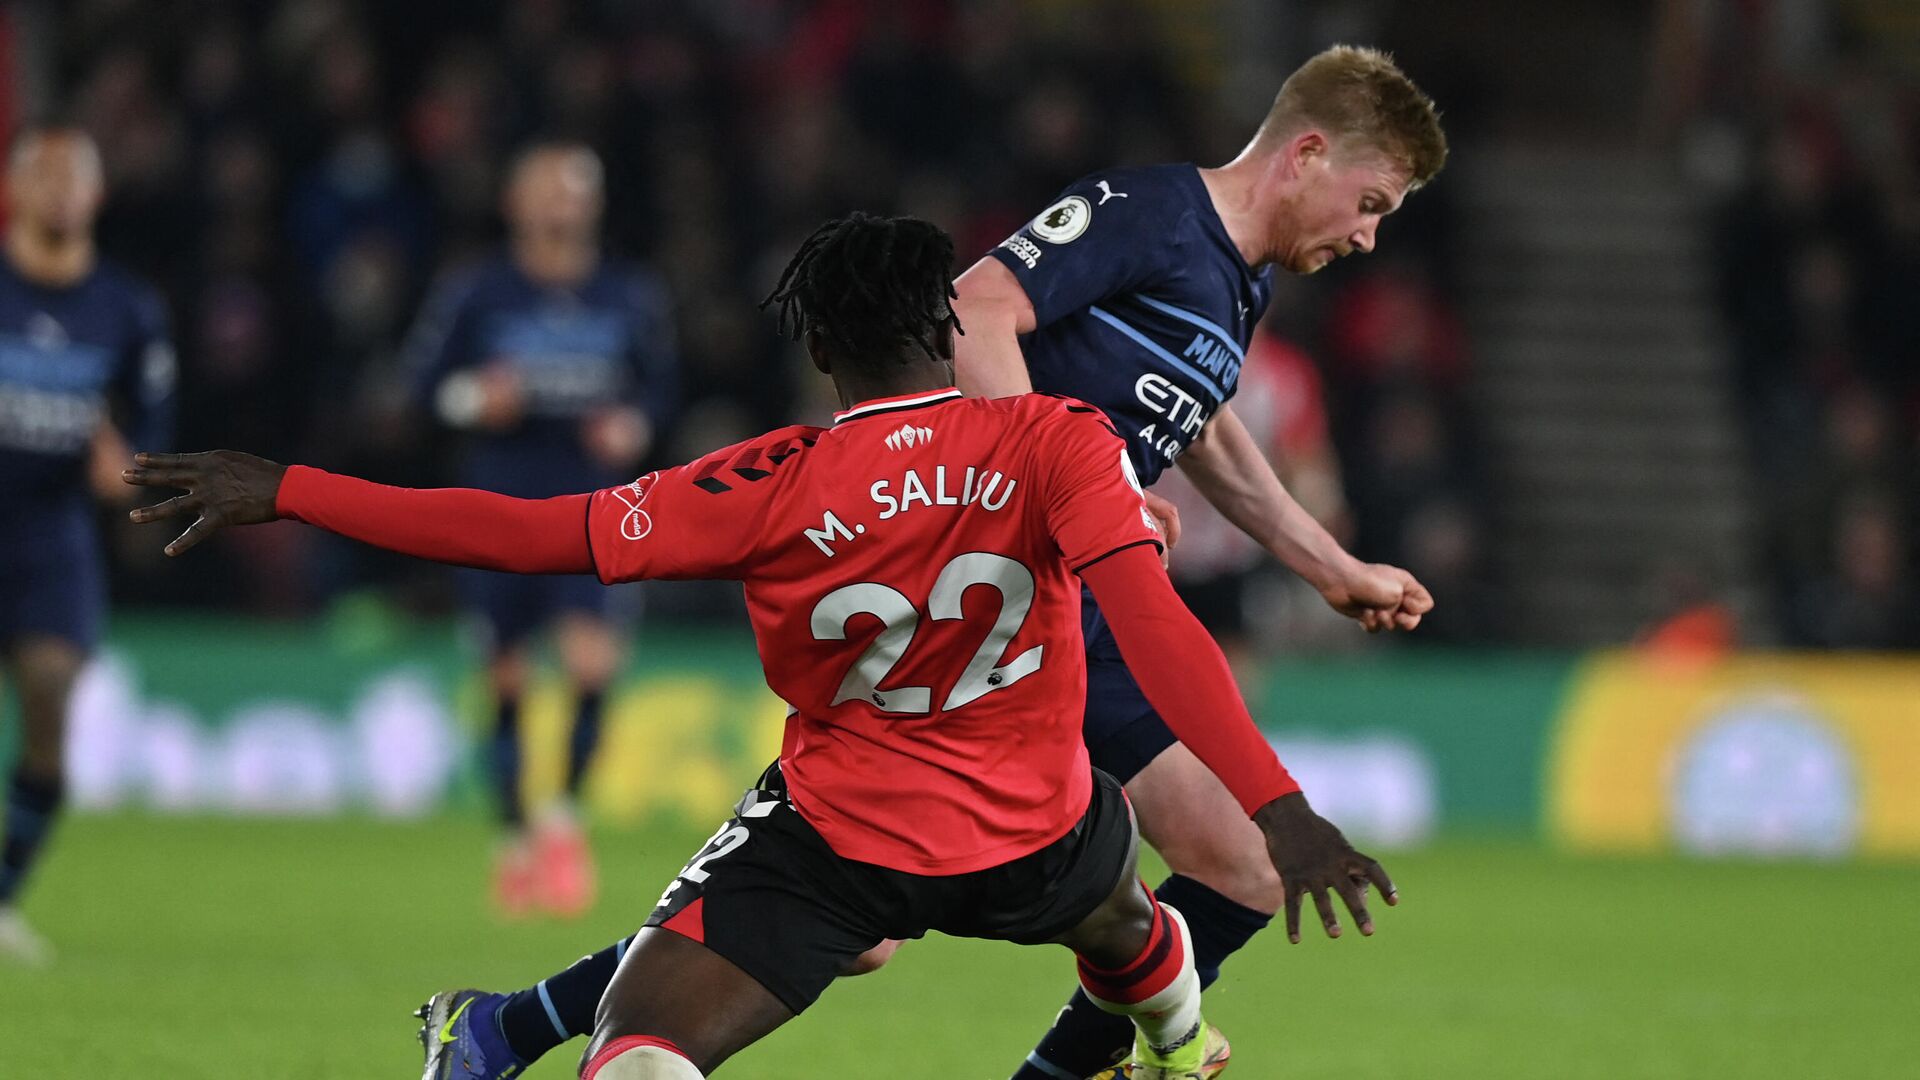 Manchester City's Belgian midfielder Kevin De Bruyne (R) is tackled by Southampton's Ghanaian defender Mohammed Salisu during the English Premier League football match between Southampton and Manchester City at St Mary's Stadium in Southampton, southern England on January 22, 2022. (Photo by Glyn KIRK / AFP) / RESTRICTED TO EDITORIAL USE. No use with unauthorized audio, video, data, fixture lists, club/league logos or 'live' services. Online in-match use limited to 120 images. An additional 40 images may be used in extra time. No video emulation. Social media in-match use limited to 120 images. An additional 40 images may be used in extra time. No use in betting publications, games or single club/league/player publications. /  - РИА Новости, 1920, 22.01.2022